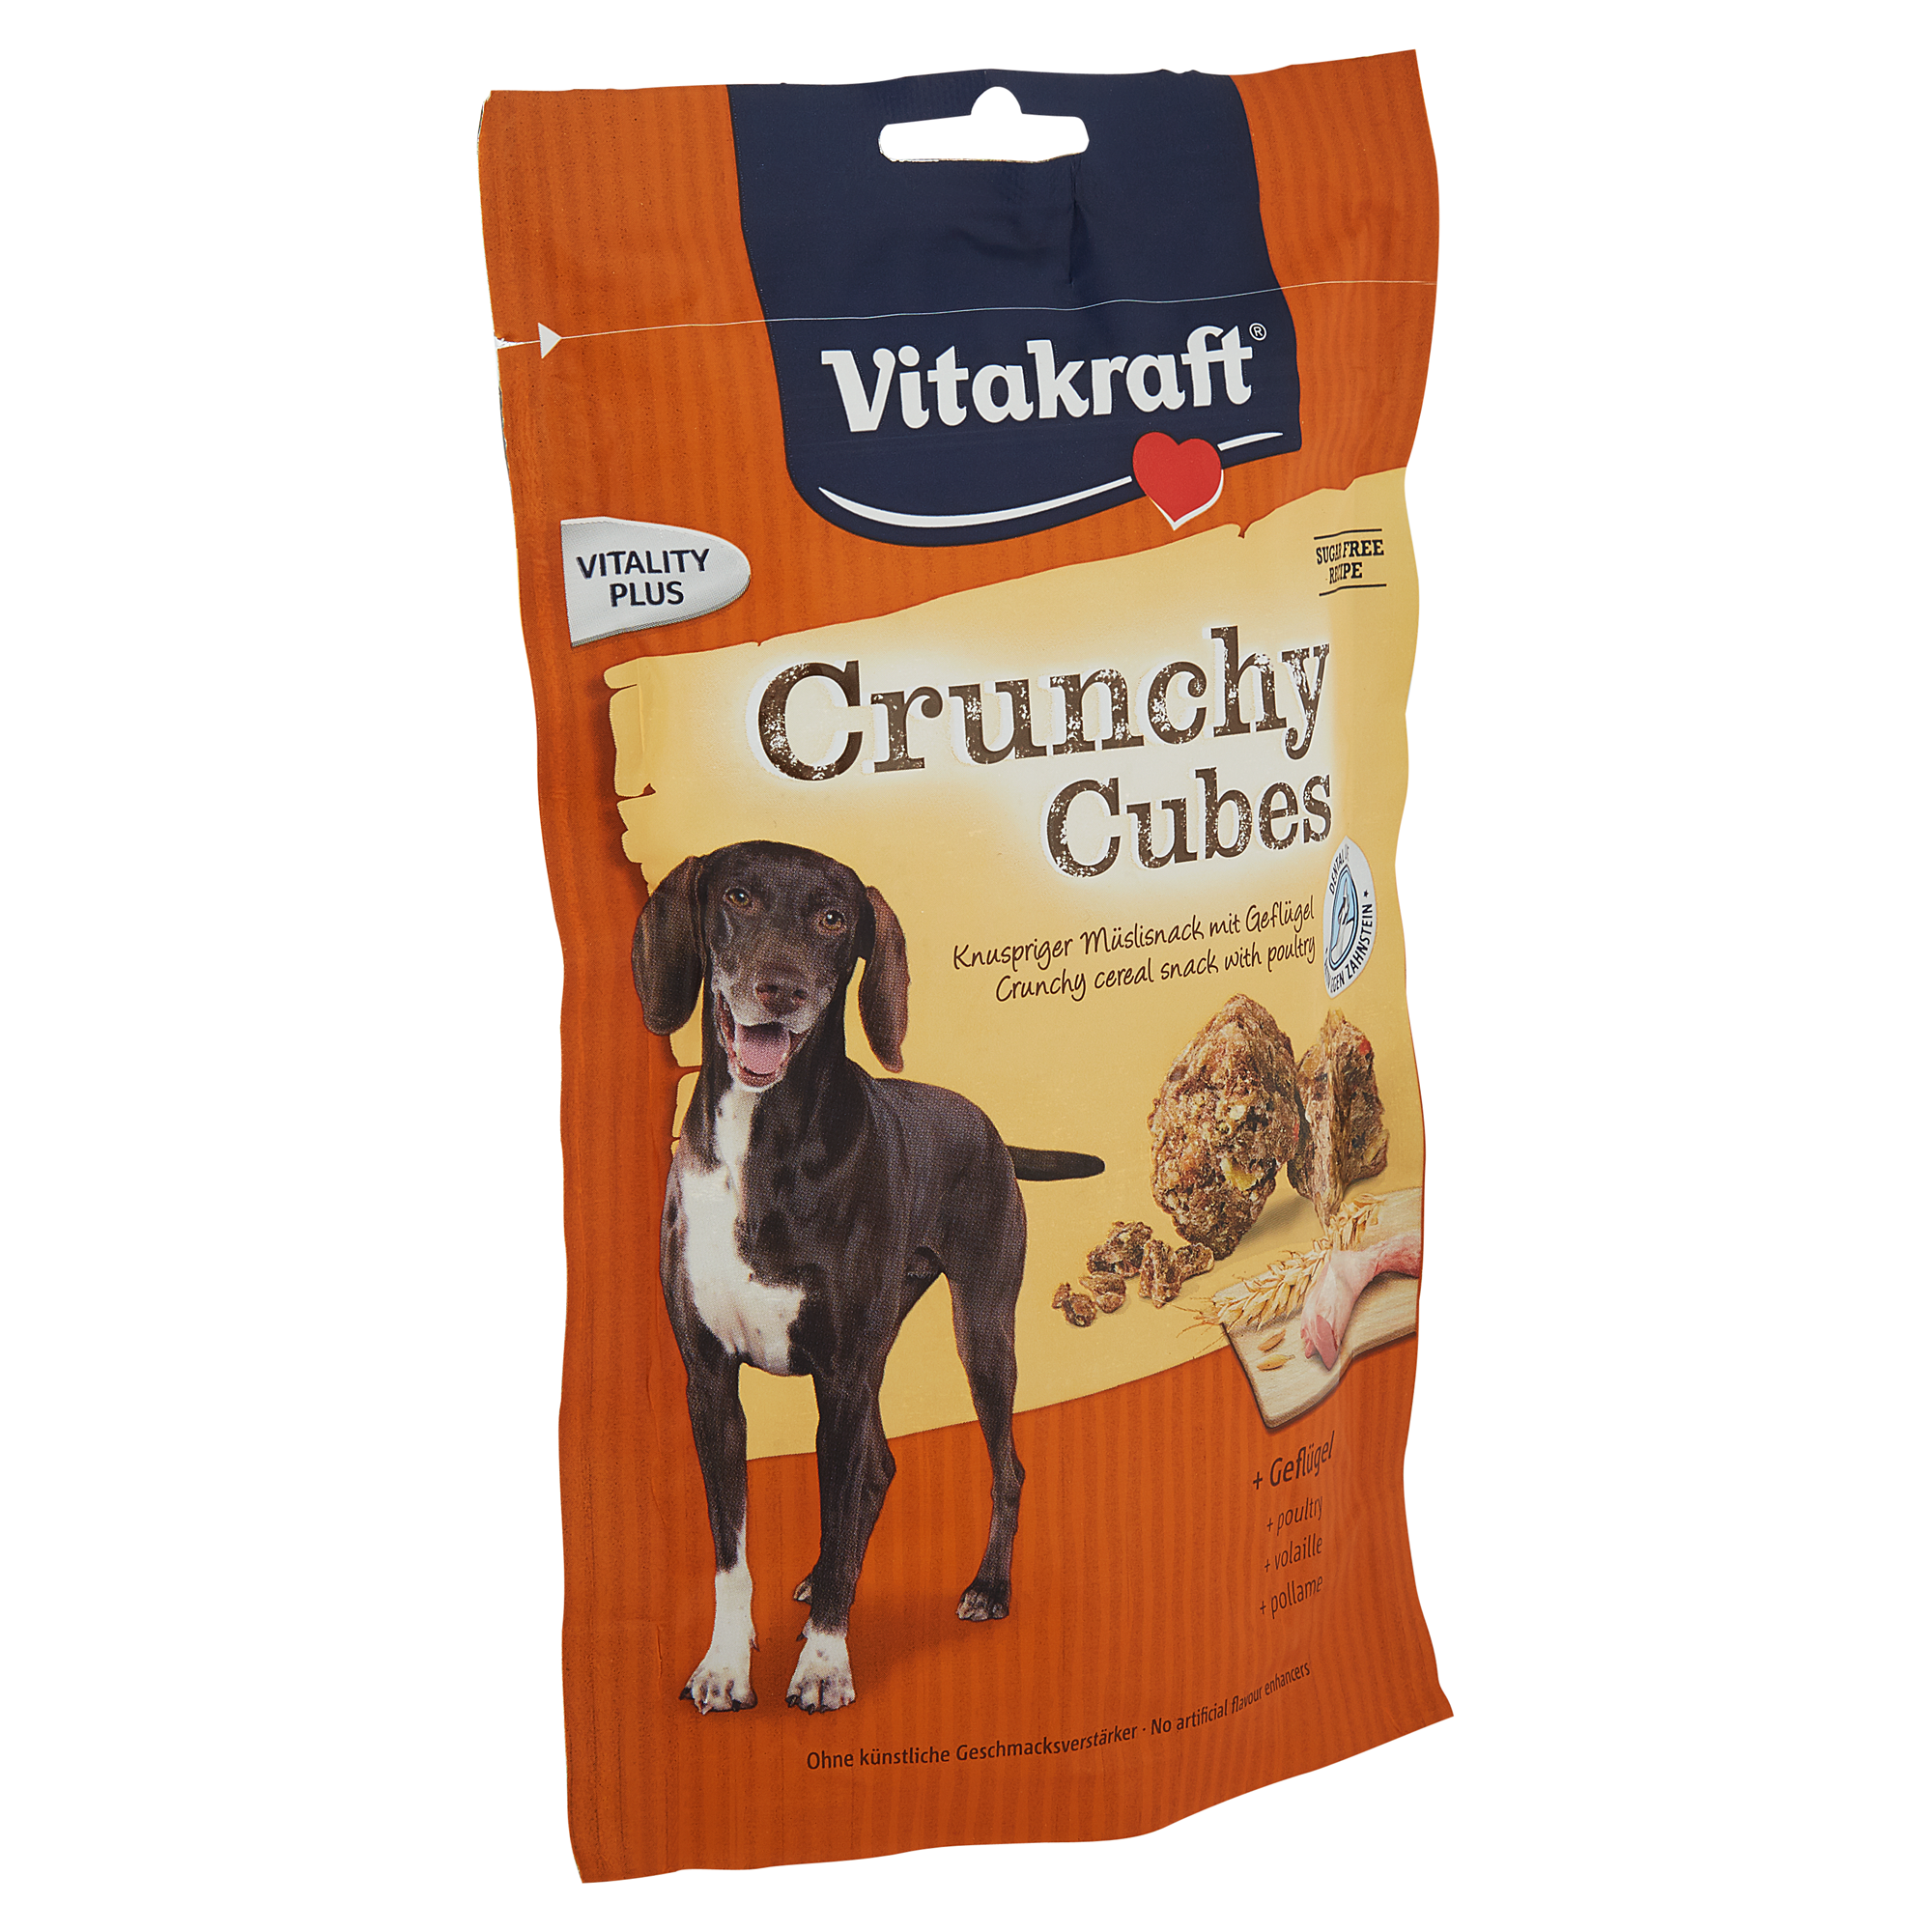 Hundesnack "Crunchy Cubes" mit Geflügel 140 g + product picture